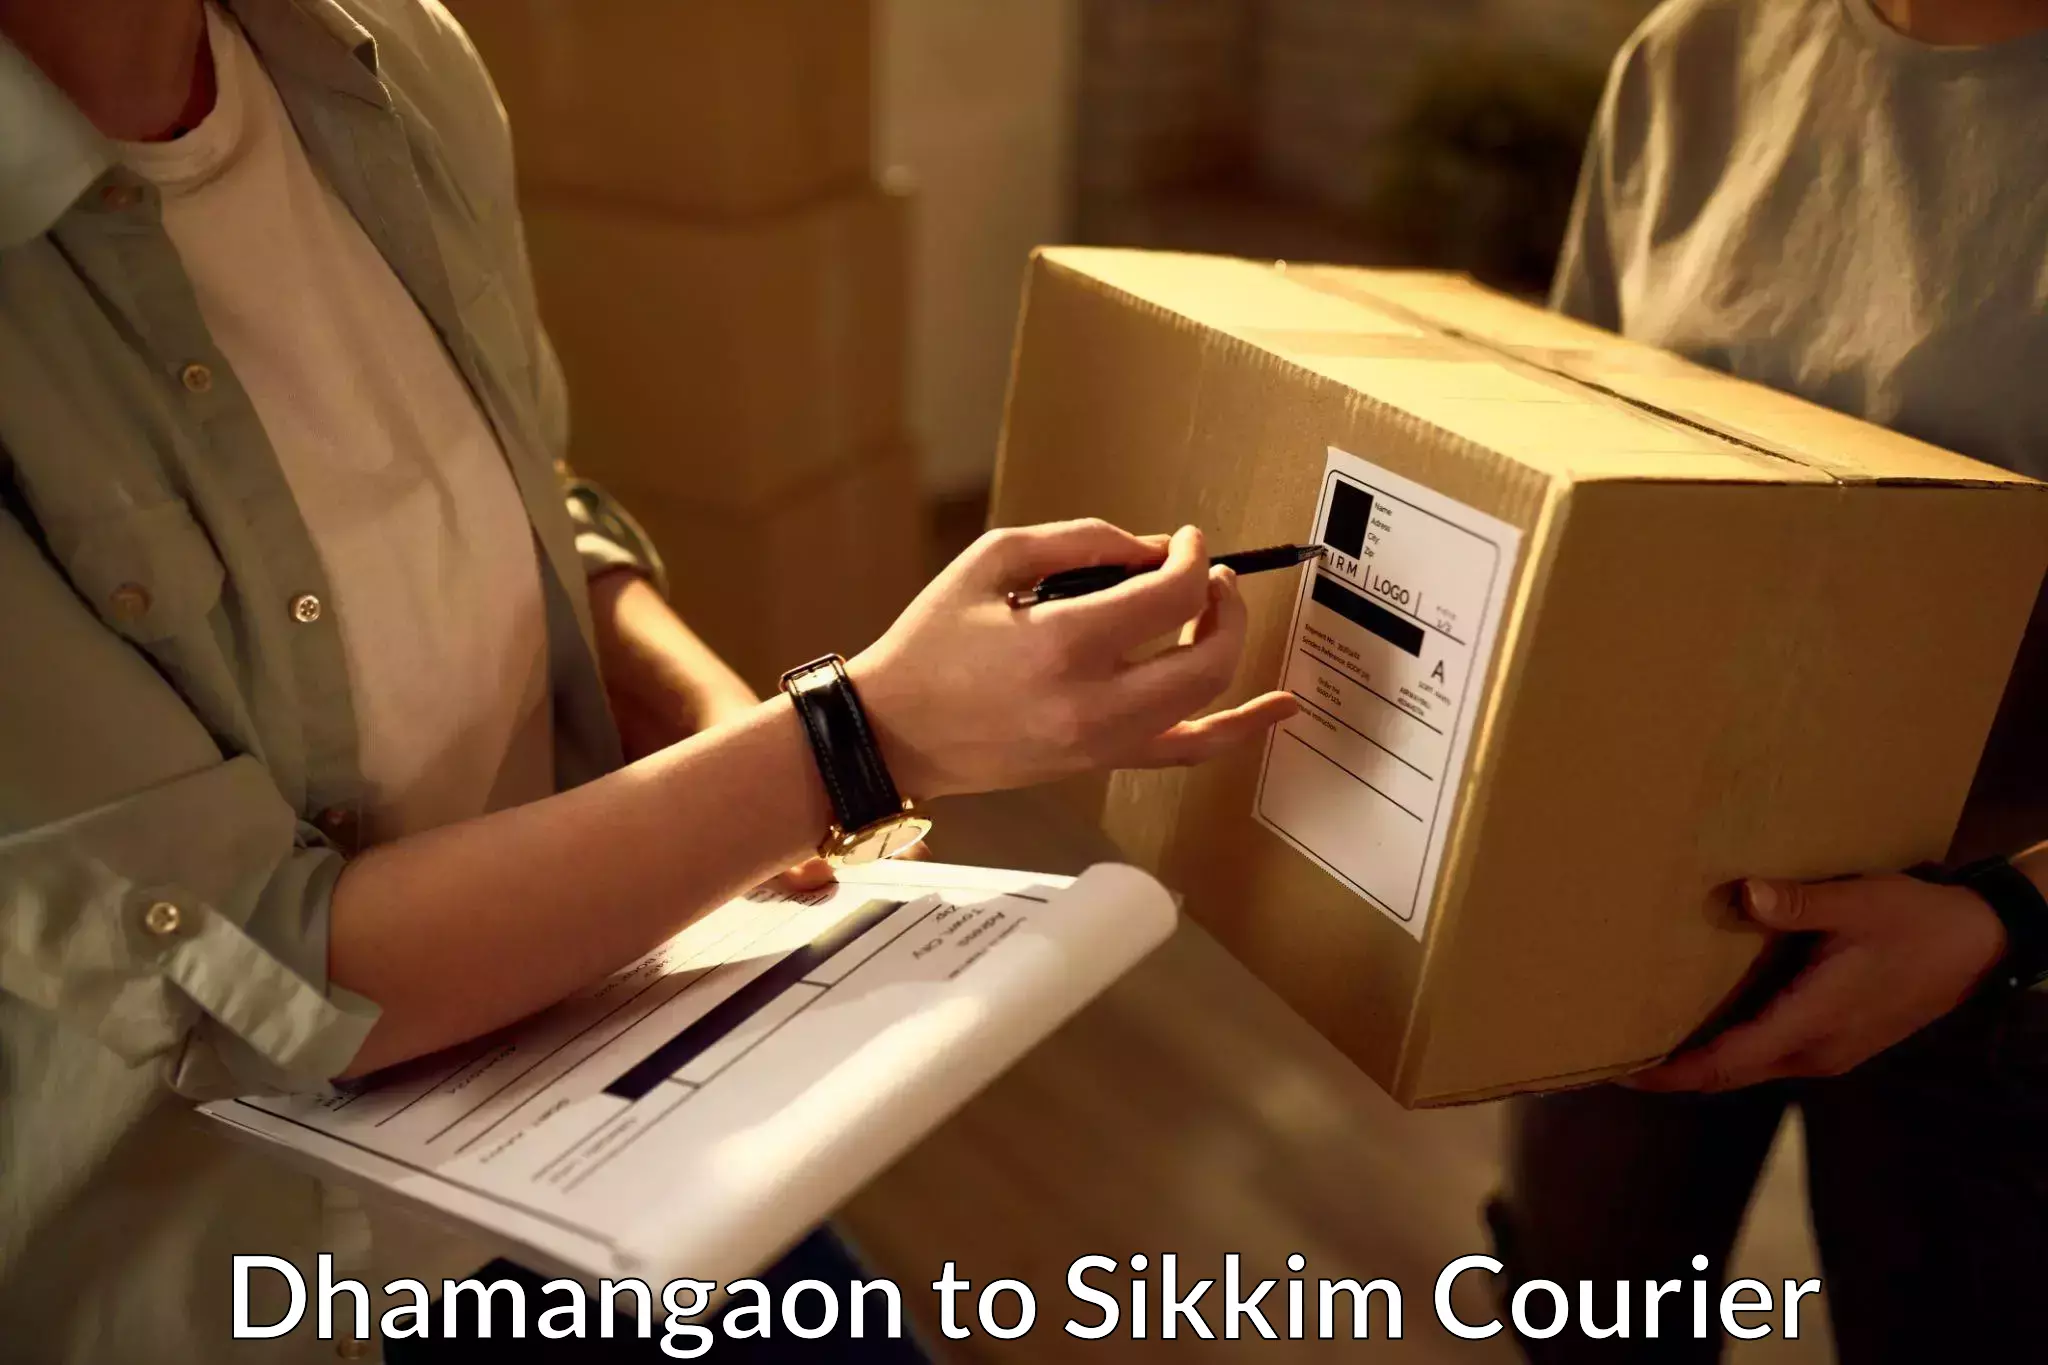 Nationwide delivery network Dhamangaon to Sikkim